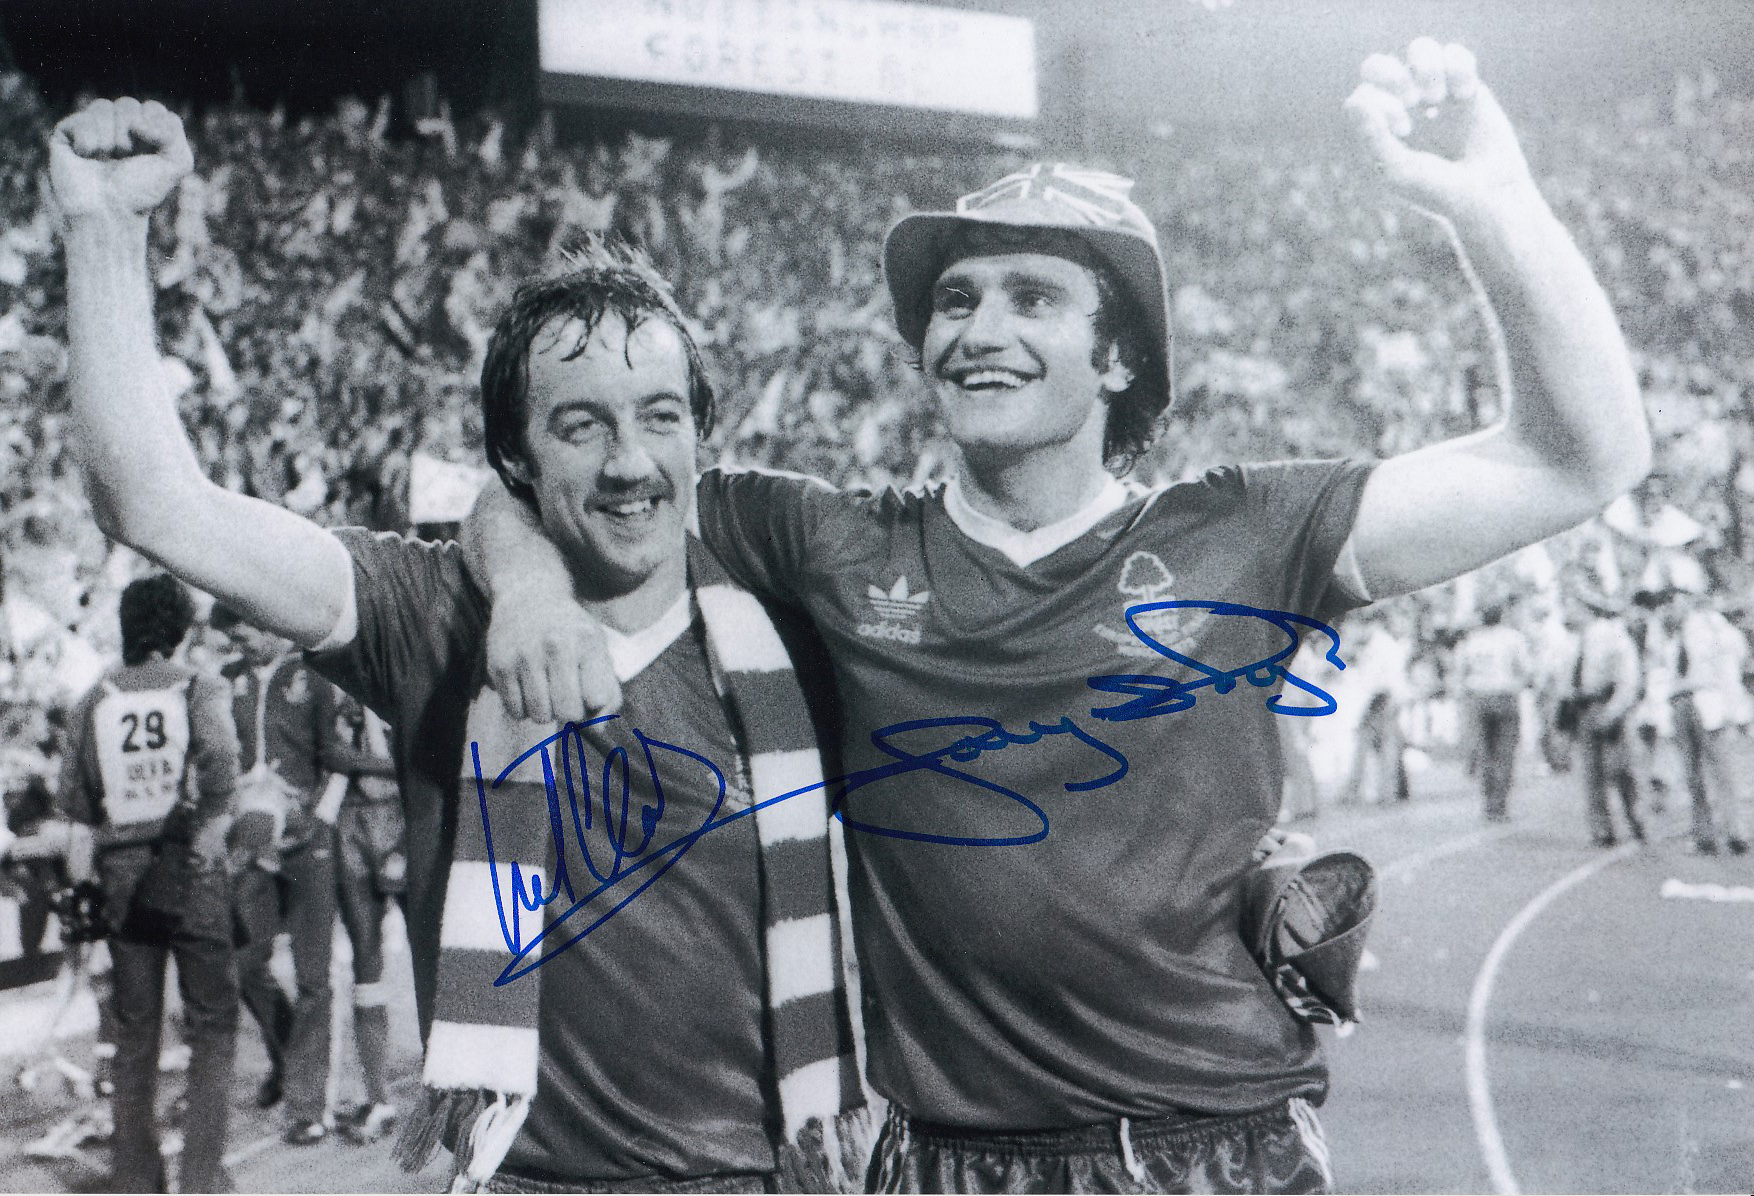 Autographed Nottm Forest 12 X 8 Photo B/W, Depicting Frank Clark And Larry Lloyd Arm In Arm As